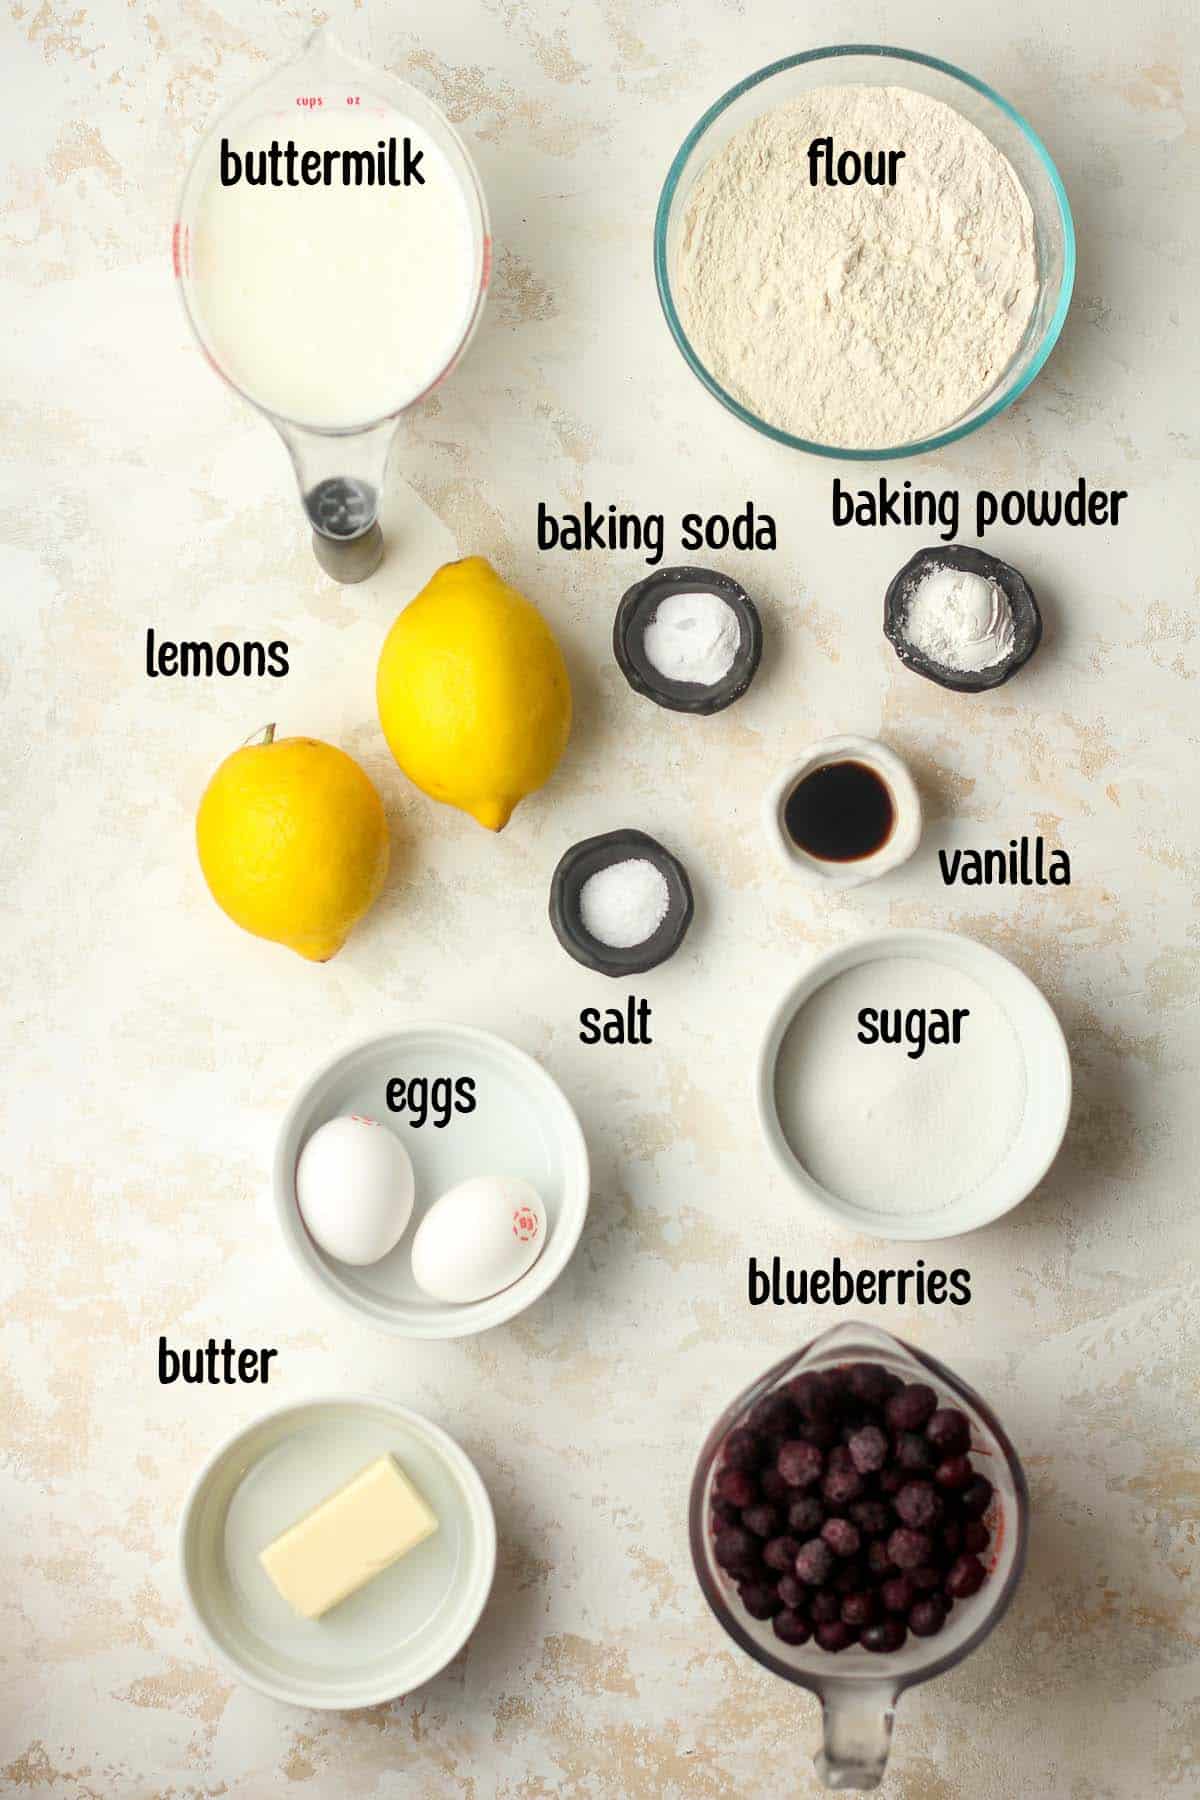 The labeled ingredients for the blueberry lemon pancakes.